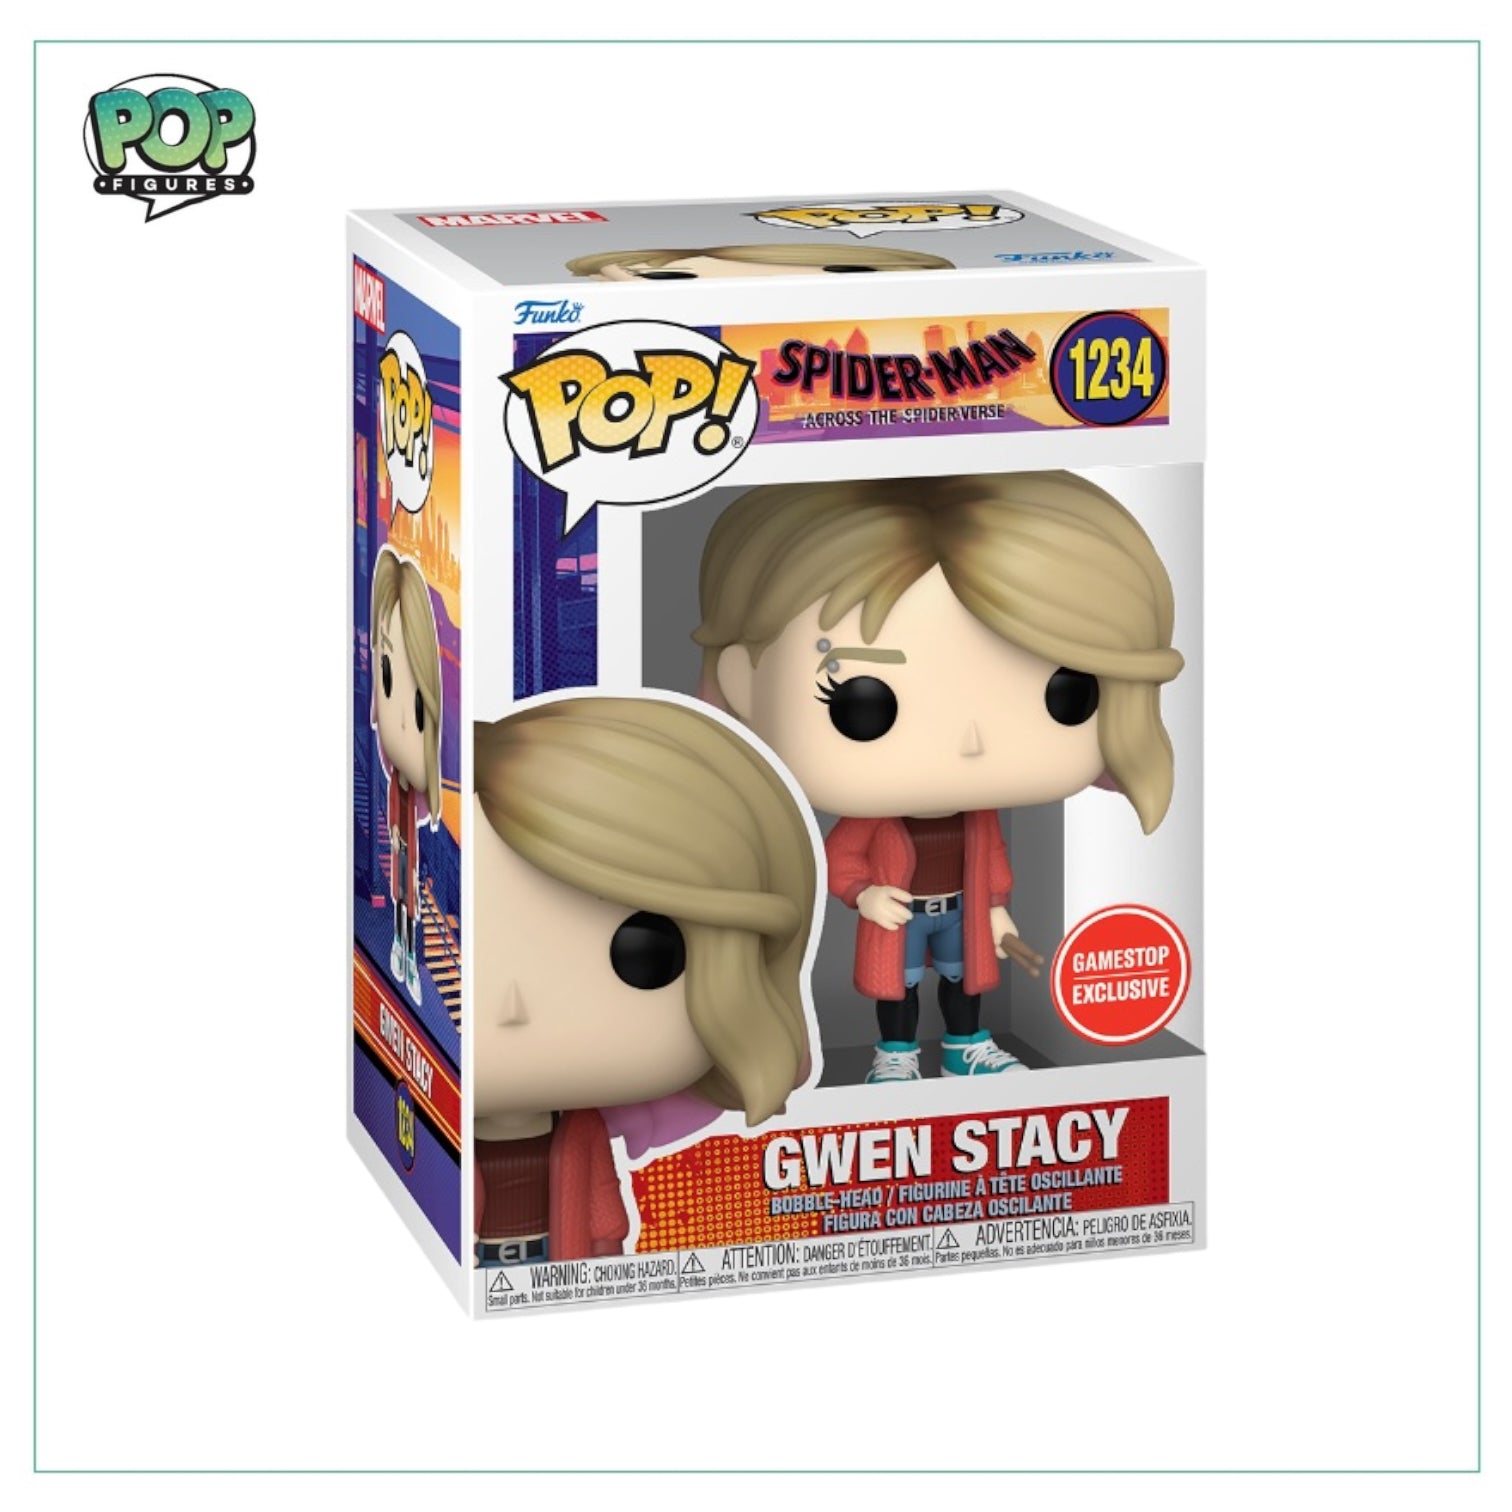 Gwen Stacy #1234 Funko Pop! - Spider-Man Across The Spider-Verse - Gamestop Exclusive - Angry Cat